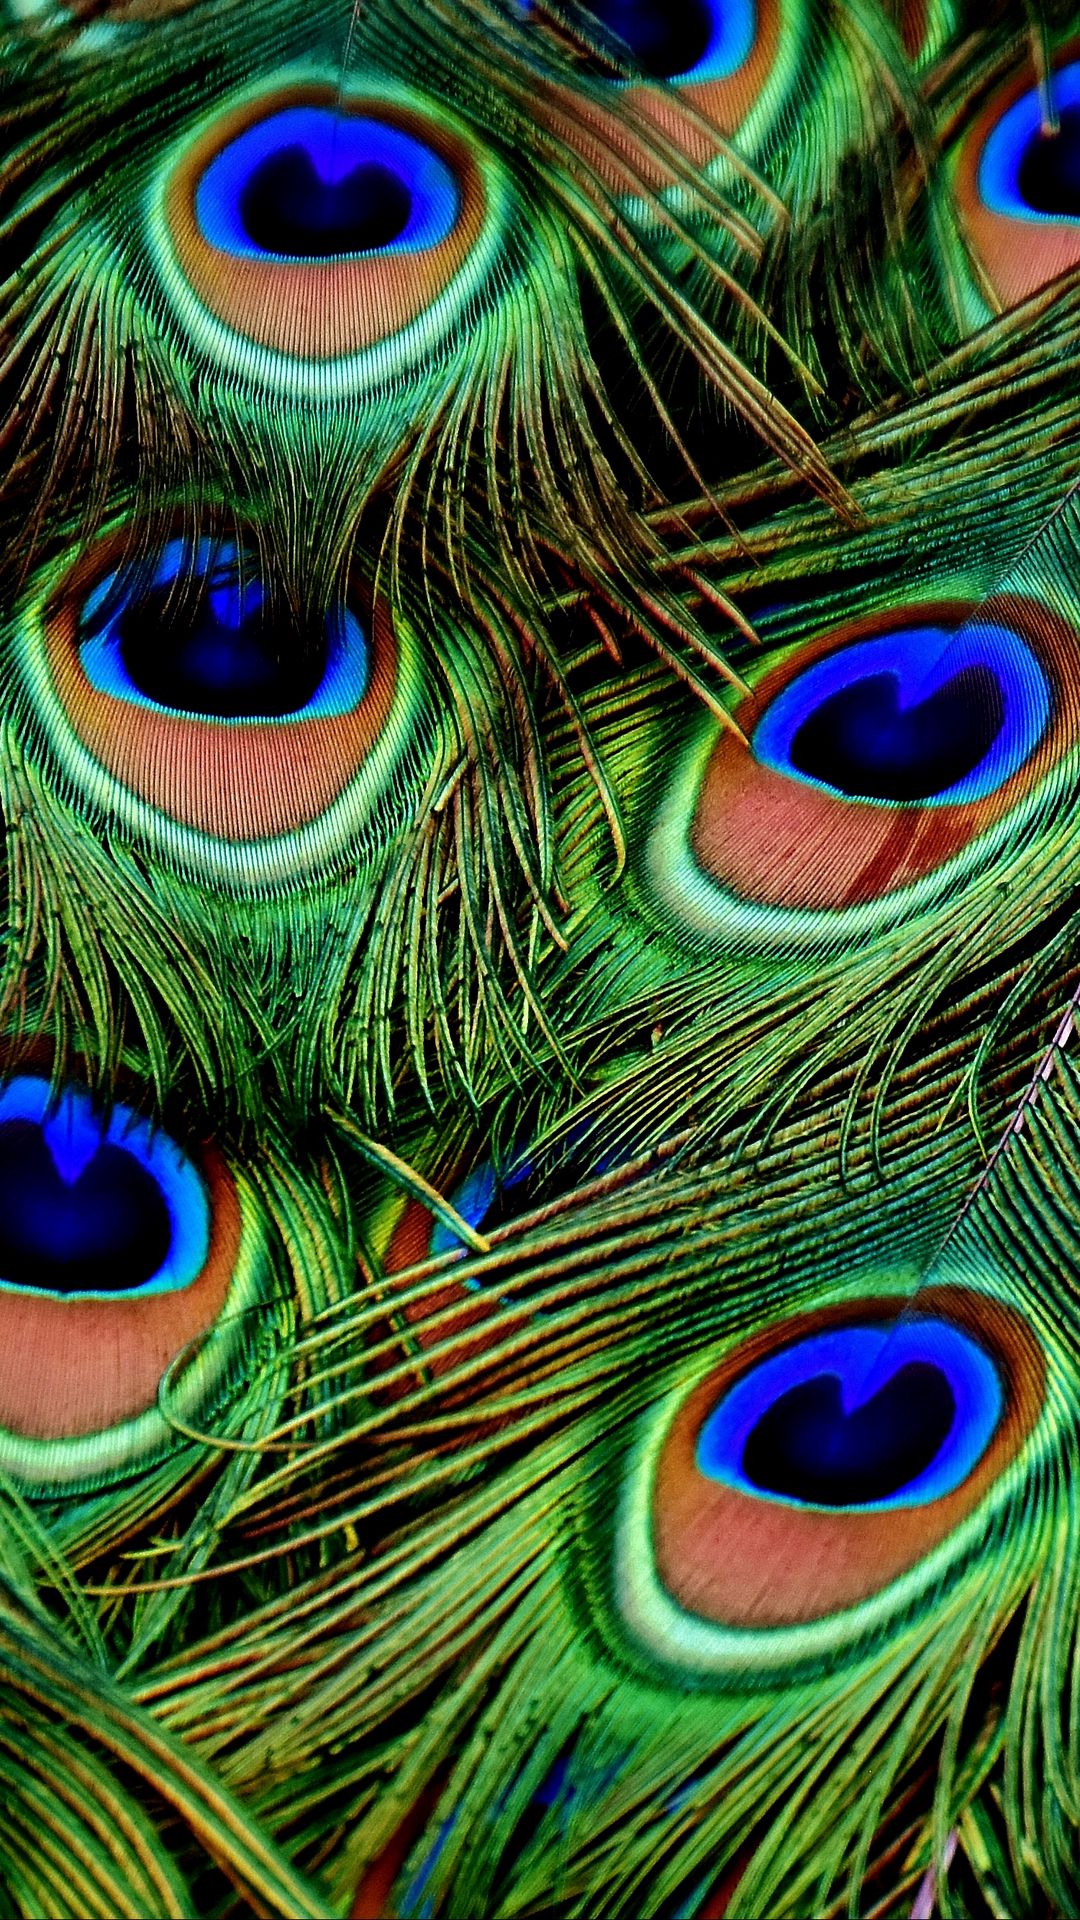 Download wallpaper 1080x1920 peacocks, feathers, patterns samsung galaxy  s4, s5, note, sony xperia z, z1, z2, z3, htc one, lenovo vibe hd background